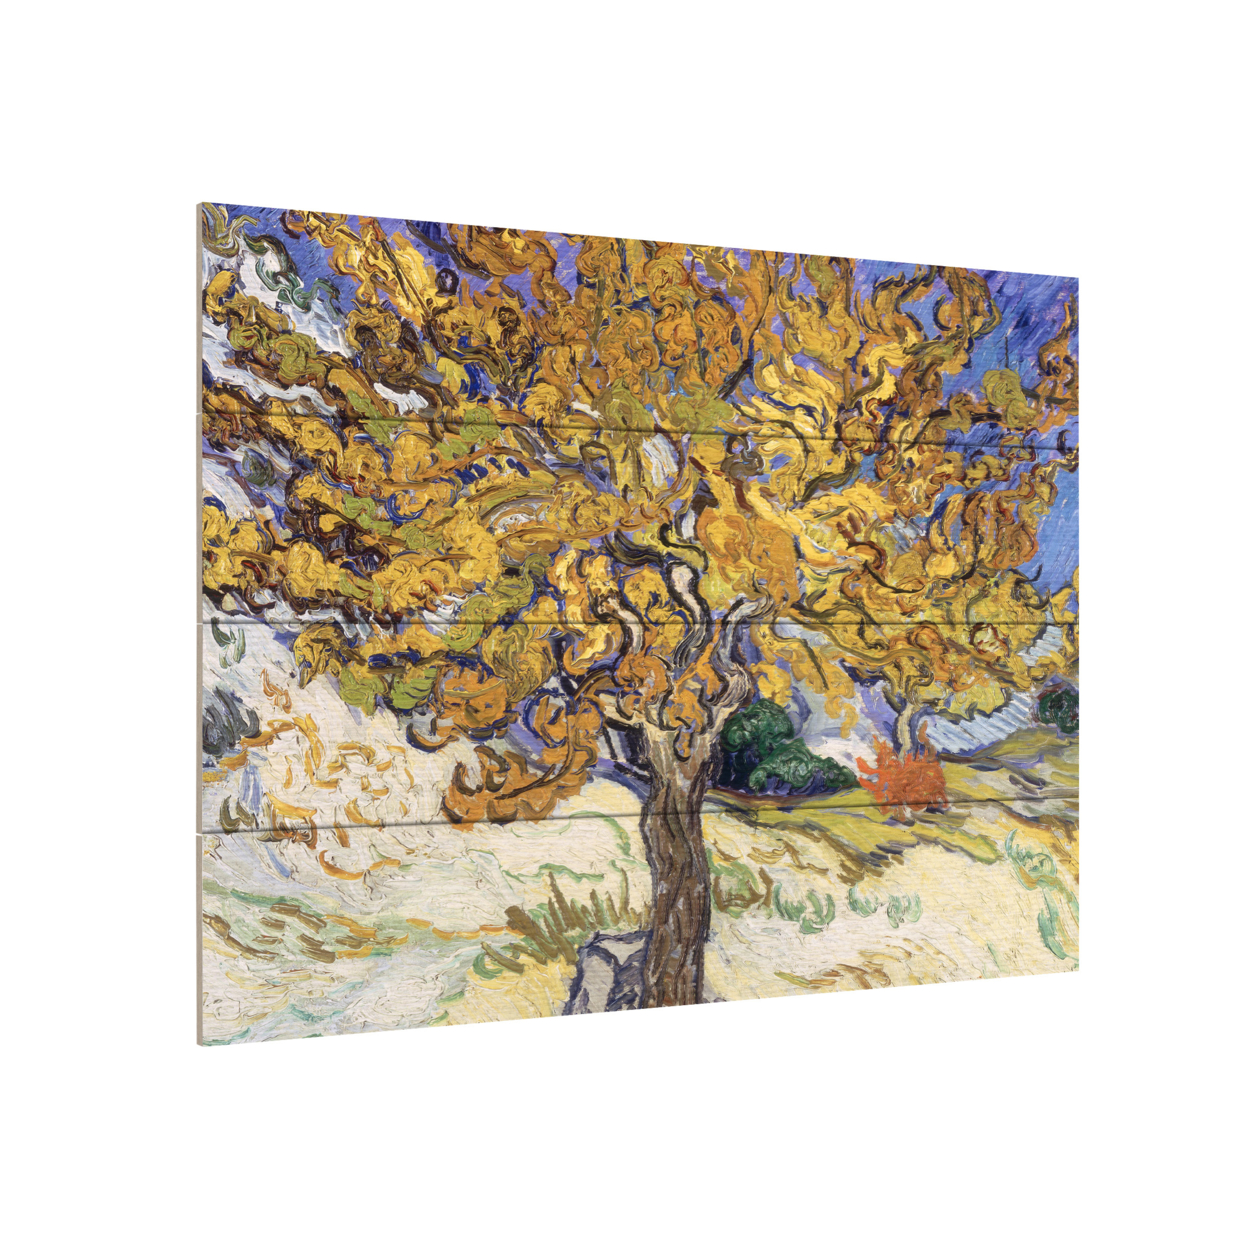 Wall Art 12 X 16 Inches Titled Mulberry Tree, 1889 Ready To Hang Printed On Wooden Planks